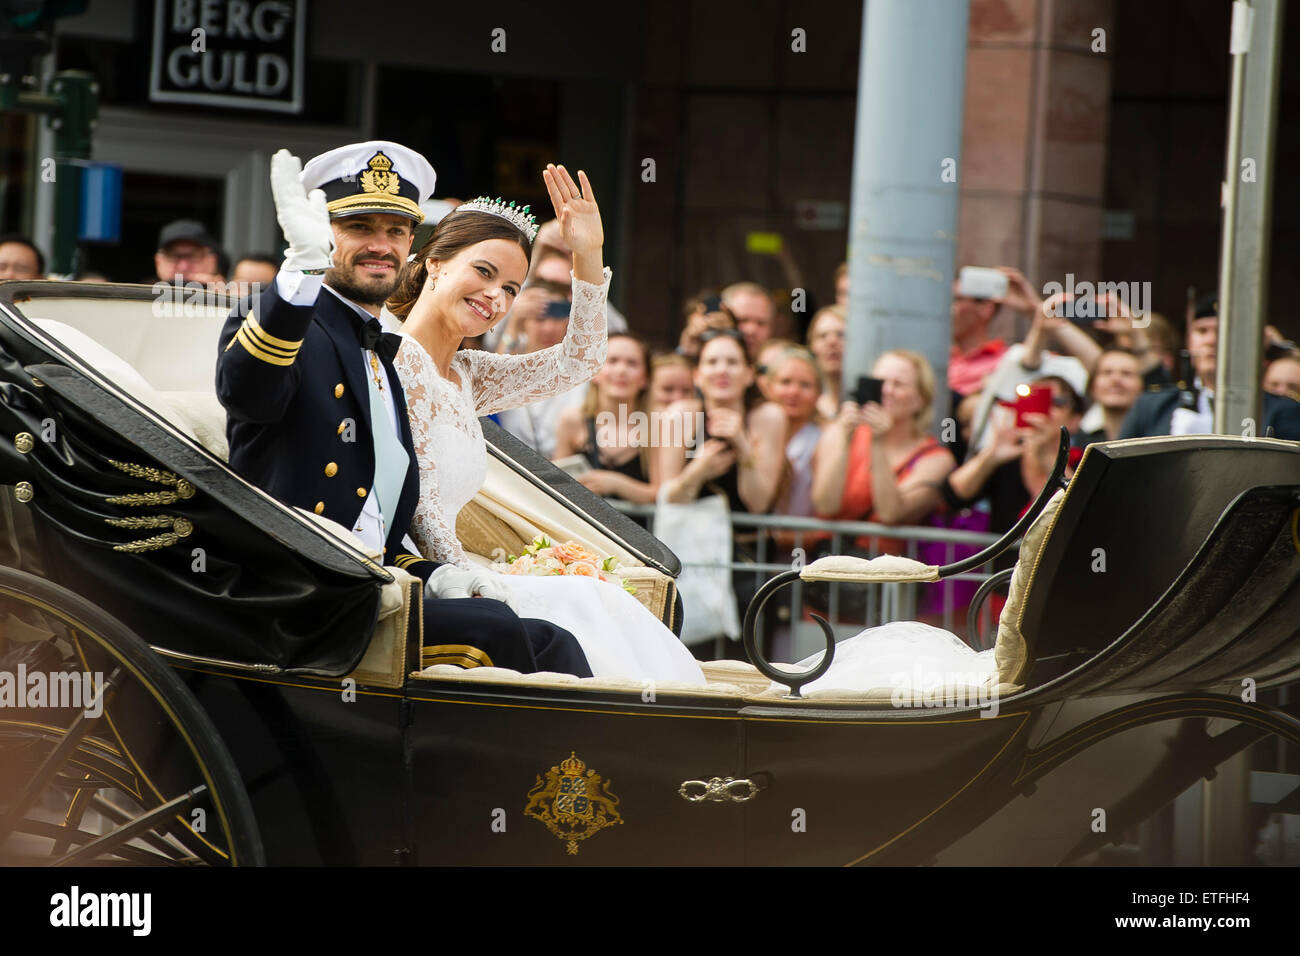 Wedding Of Prince Carl Philip in Sweden Stock Photo